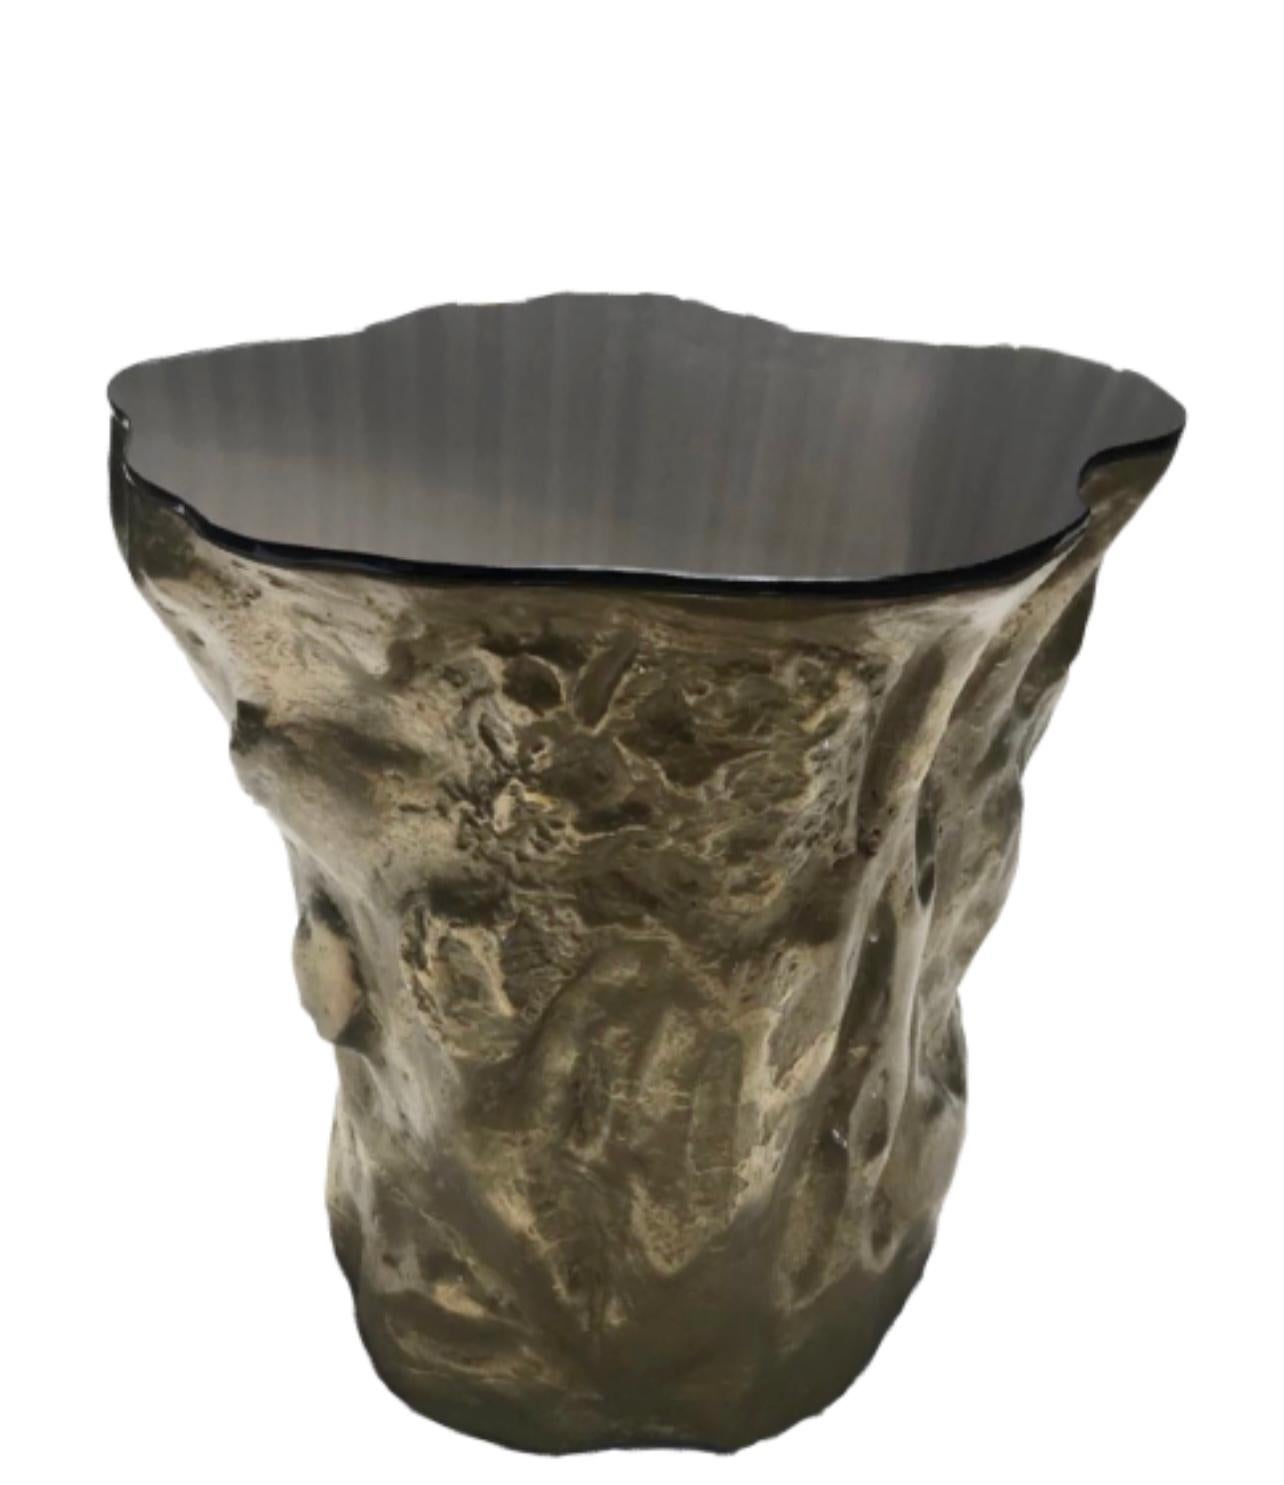 The Strom series is a nature inspired furniture design with more than an organically sculpted form to present. The base illustrates a charismatic part of a tree trunk in molten patinated brass finish and the fine metallic glass top brings a